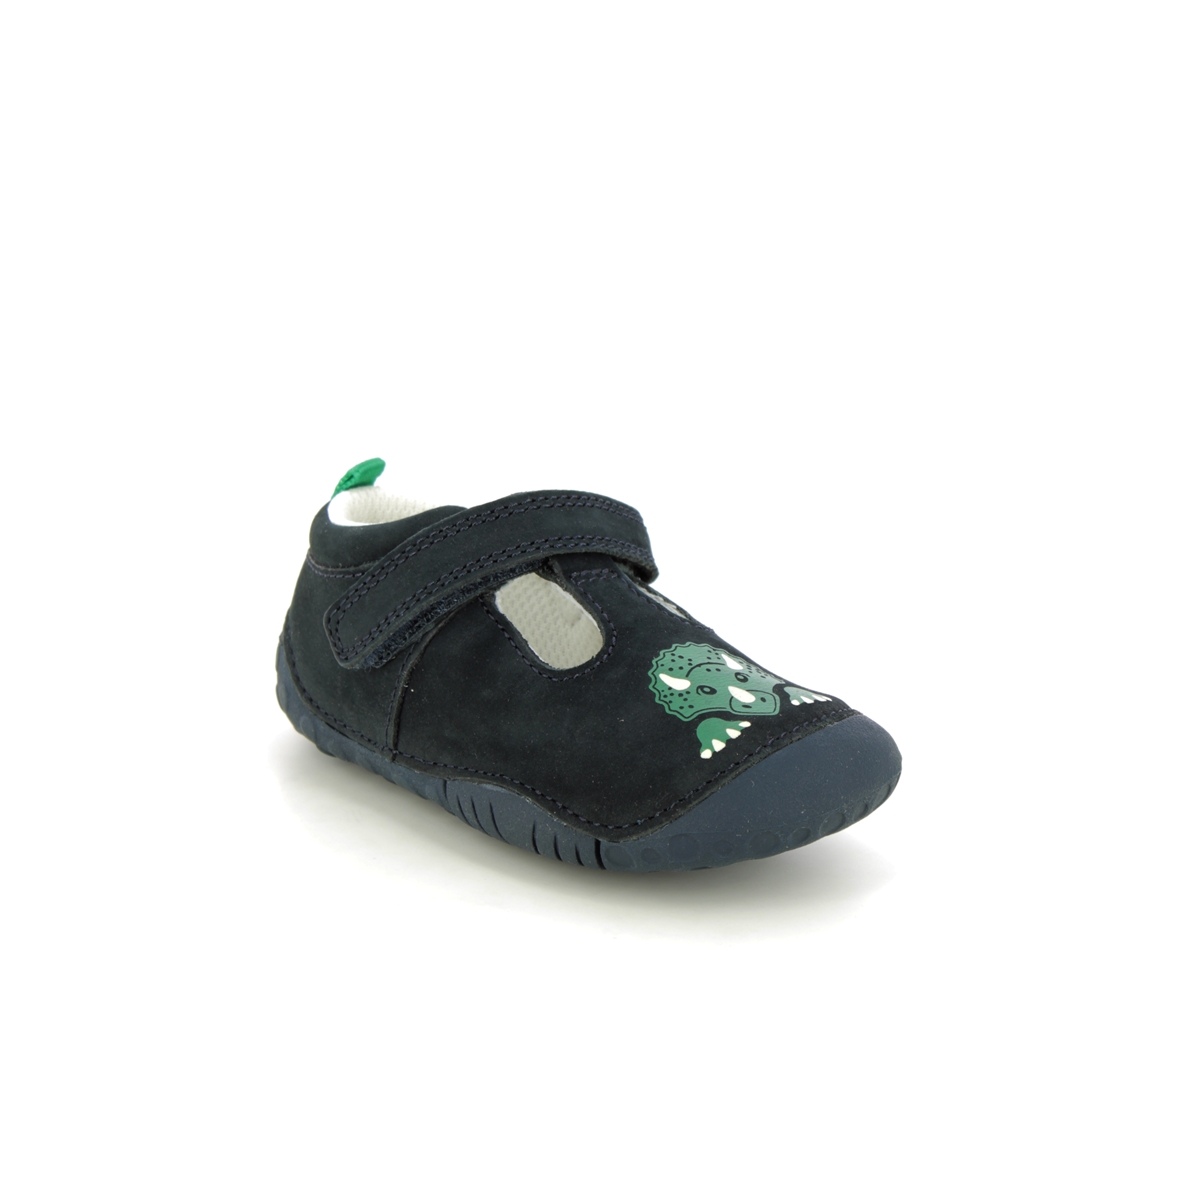 Start Rite Stomper T Bar Navy Nubuck Kids Boys First Shoes 0785-97G in a Plain Leather in Size 4.5